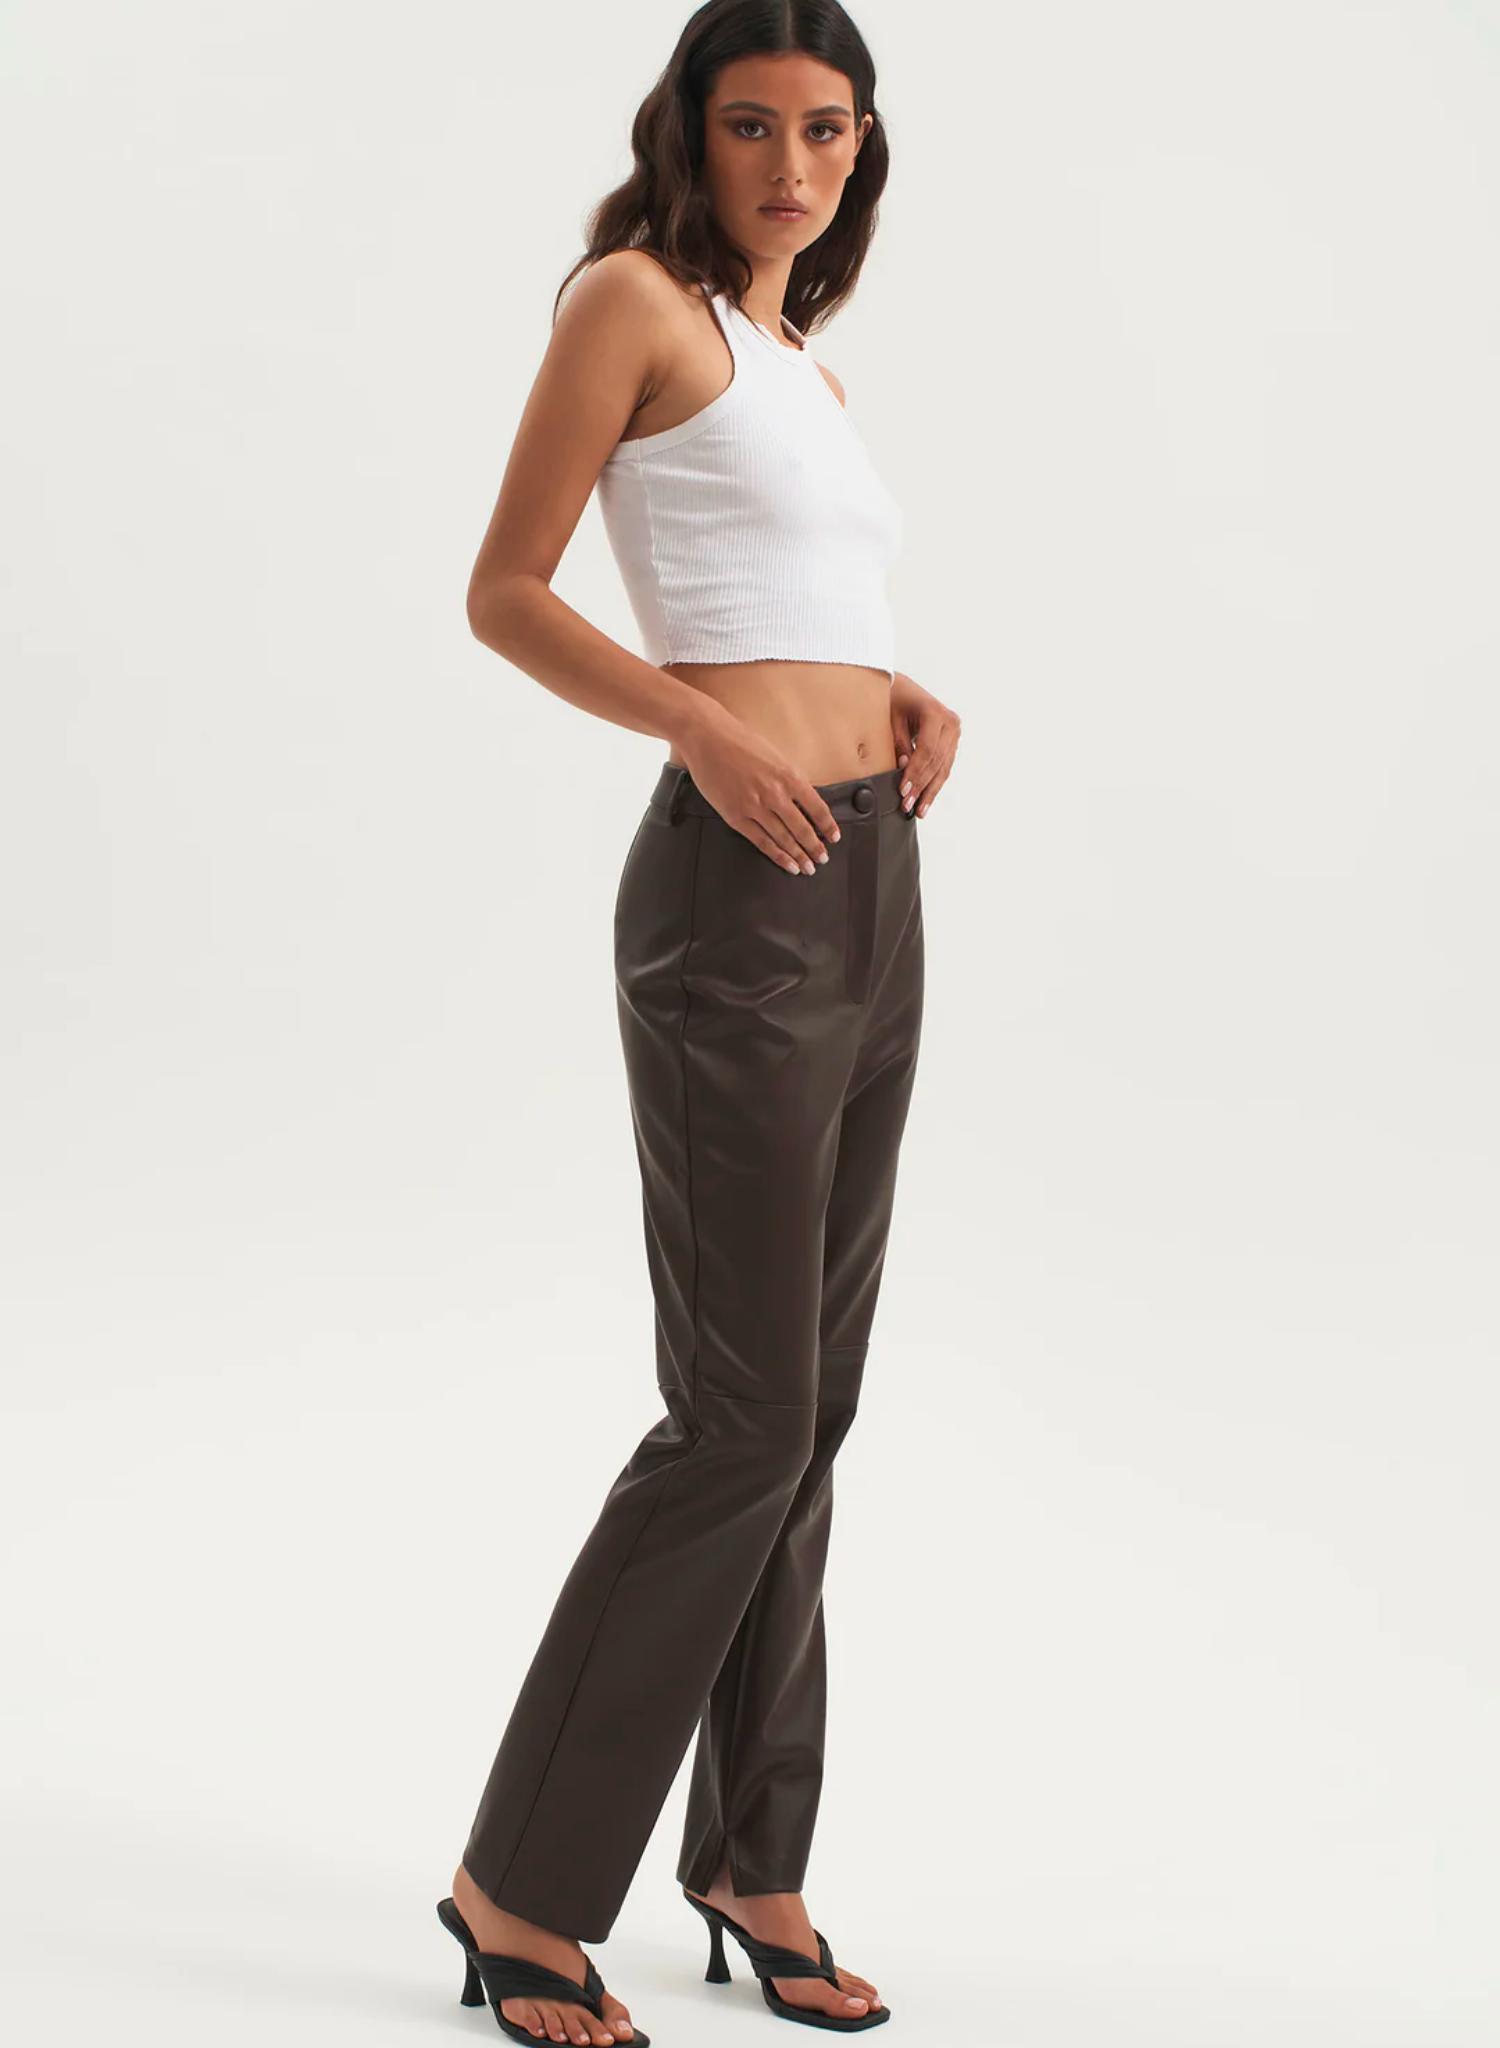 The Lexi Pant is a classic cut high waisted and cropped leg fit. The soft faux leather fabric is comfy and durable, featuring an above knee seam that ensures they bend and stretch as you do. This is the perfect new staple for your wardrobe.